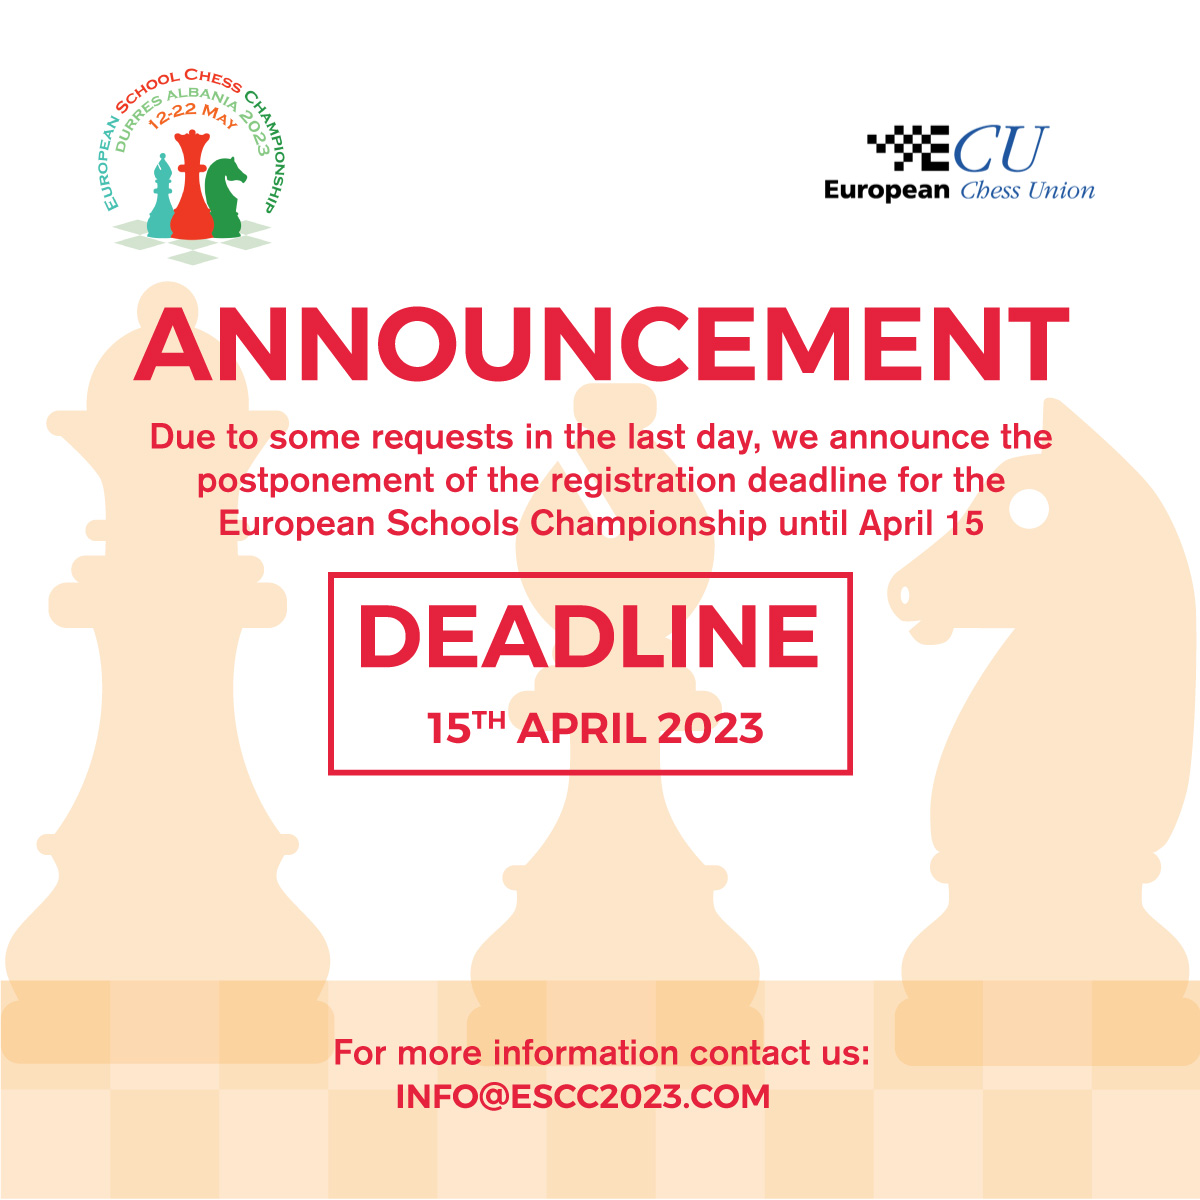 👉Announcement: Due to some requests in the last day, we announce the postponement of the registration deadline for the European Schools Championship until April 15, 2023